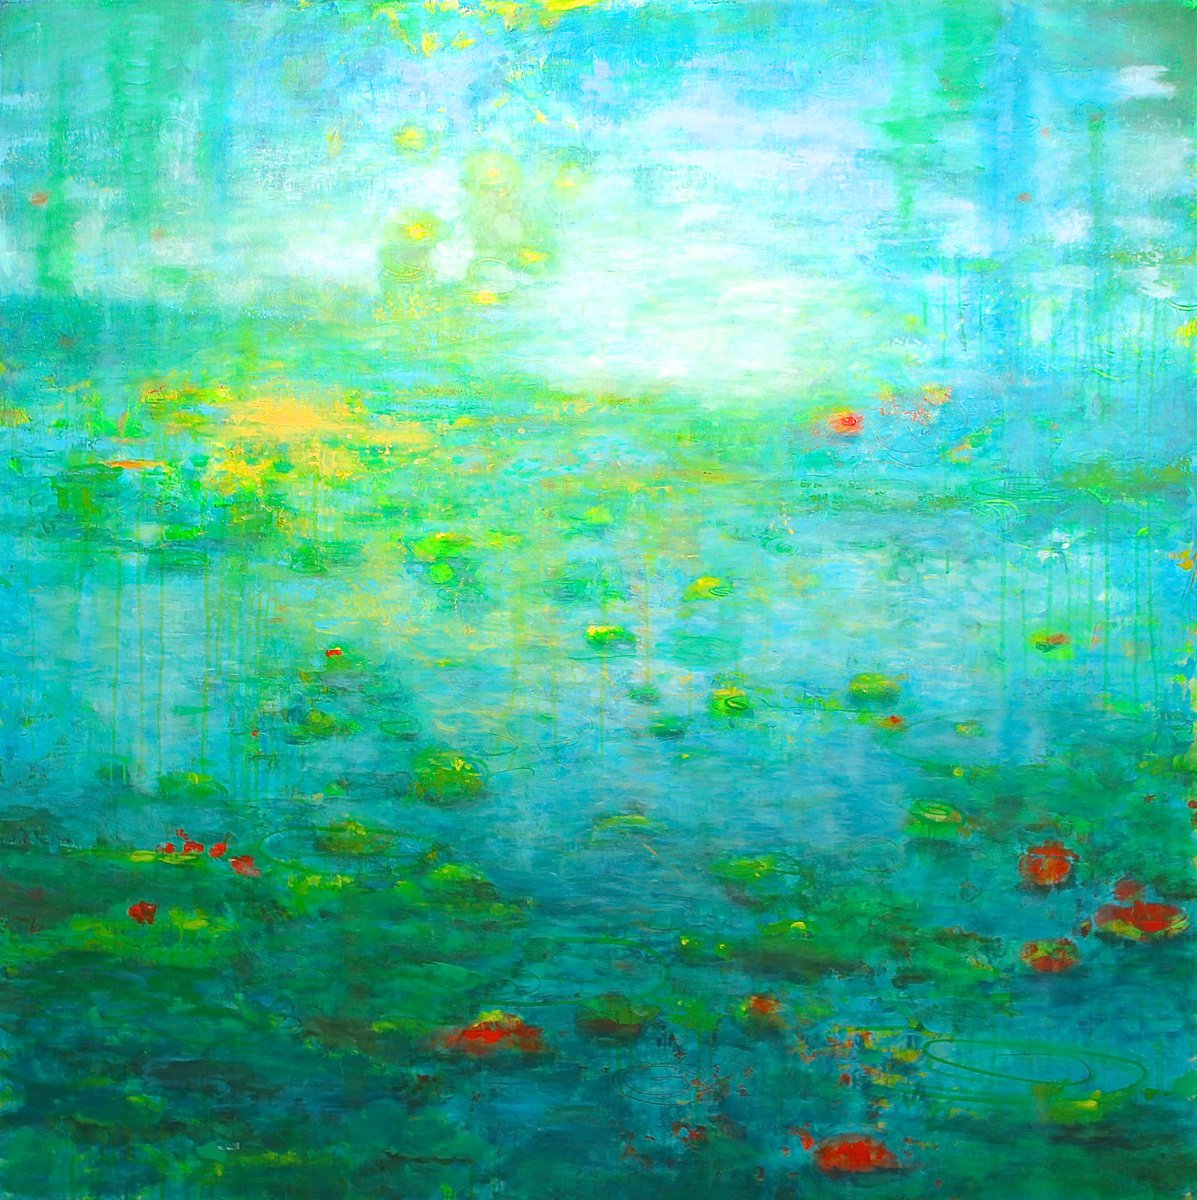 Peace xl acrylic painting on canvas48x48 by Laura Spring